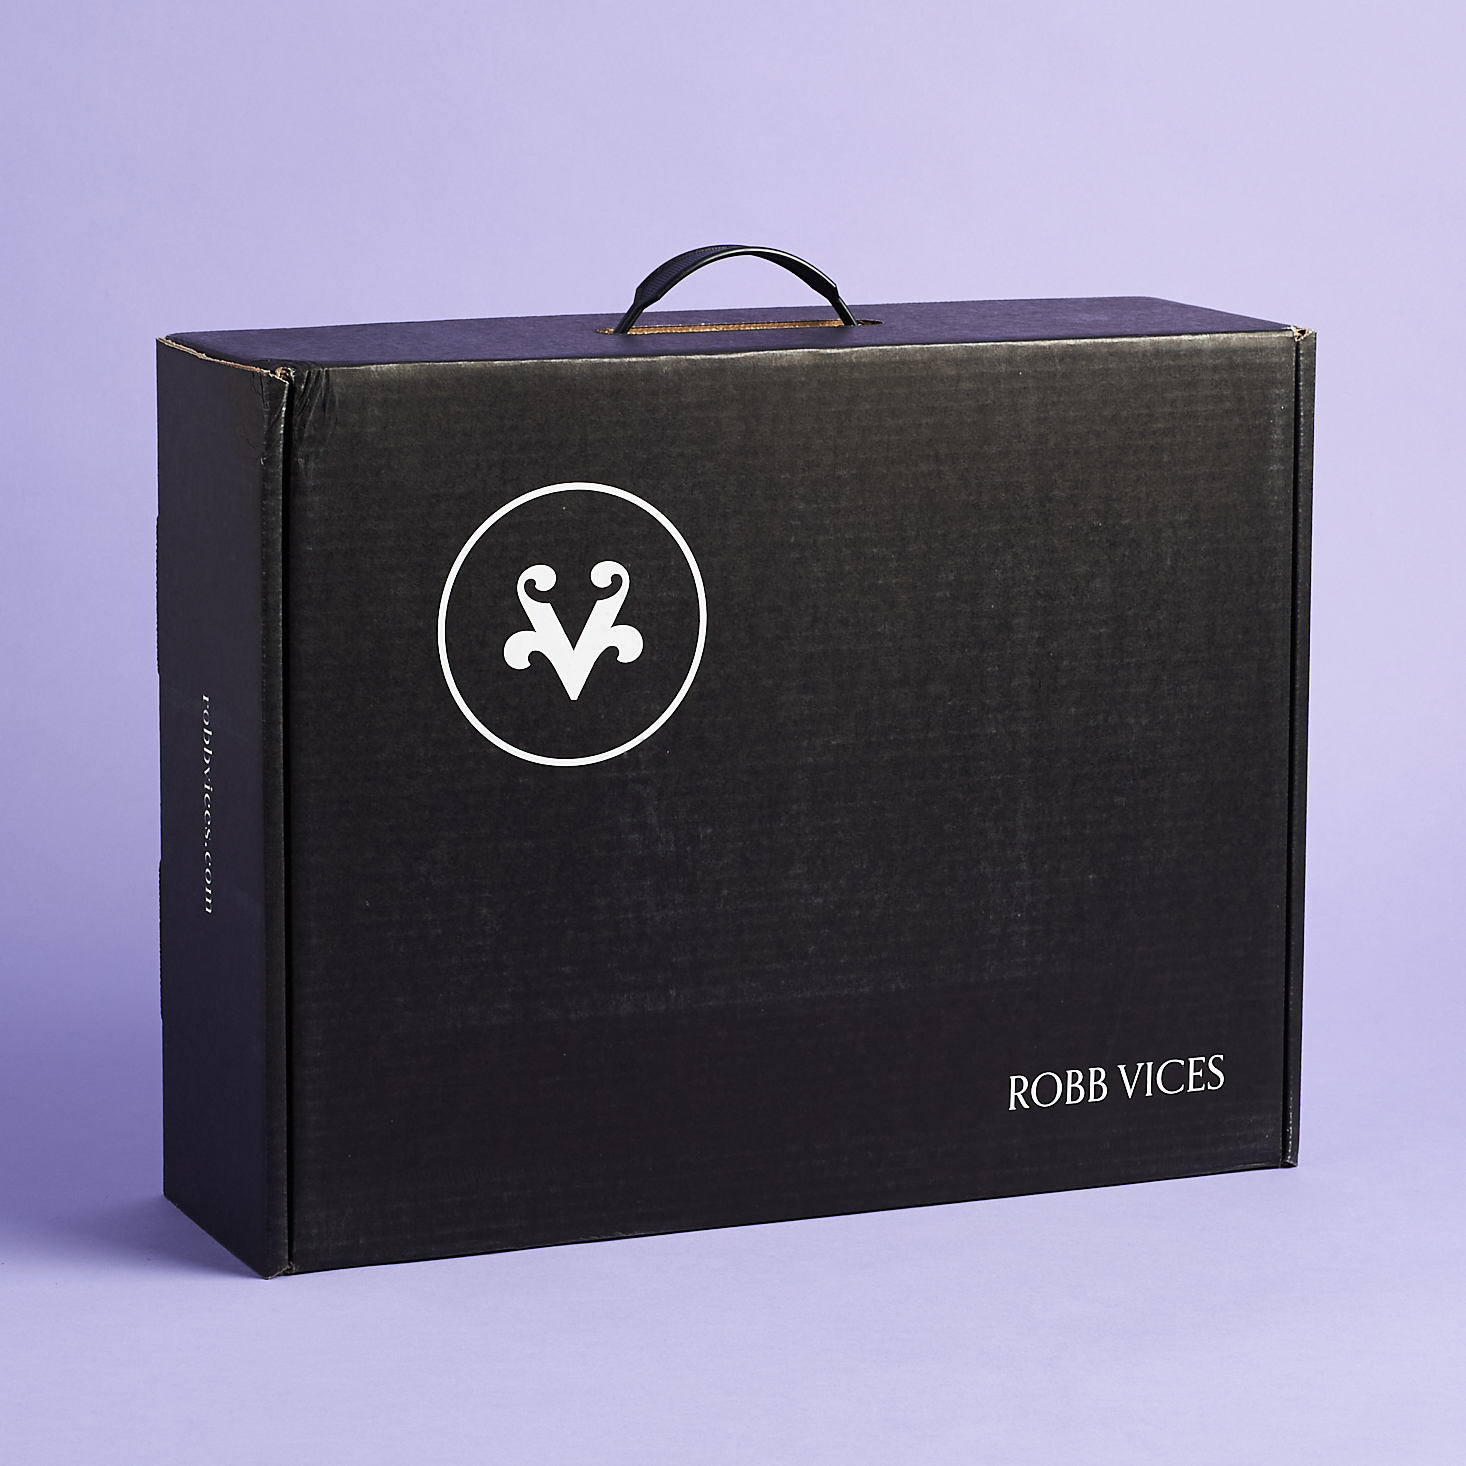 Robb Vices Subscription Box Review – February 2020